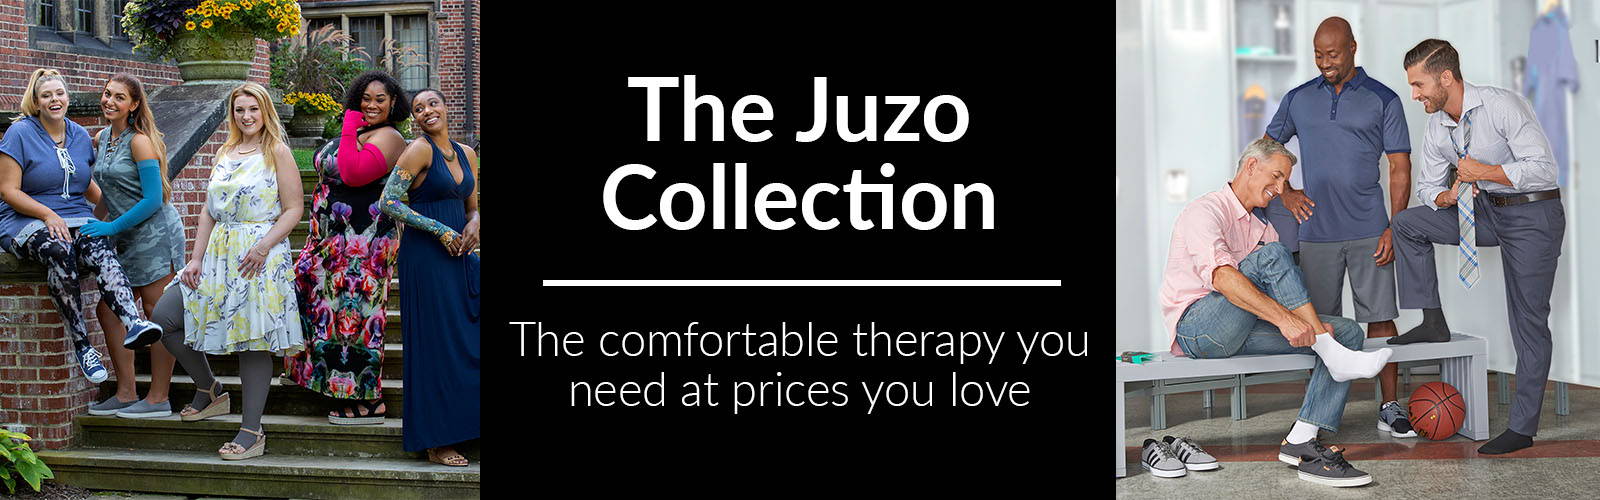 The Juzo Collection: the comfortable compression therapy you need at prices you love.